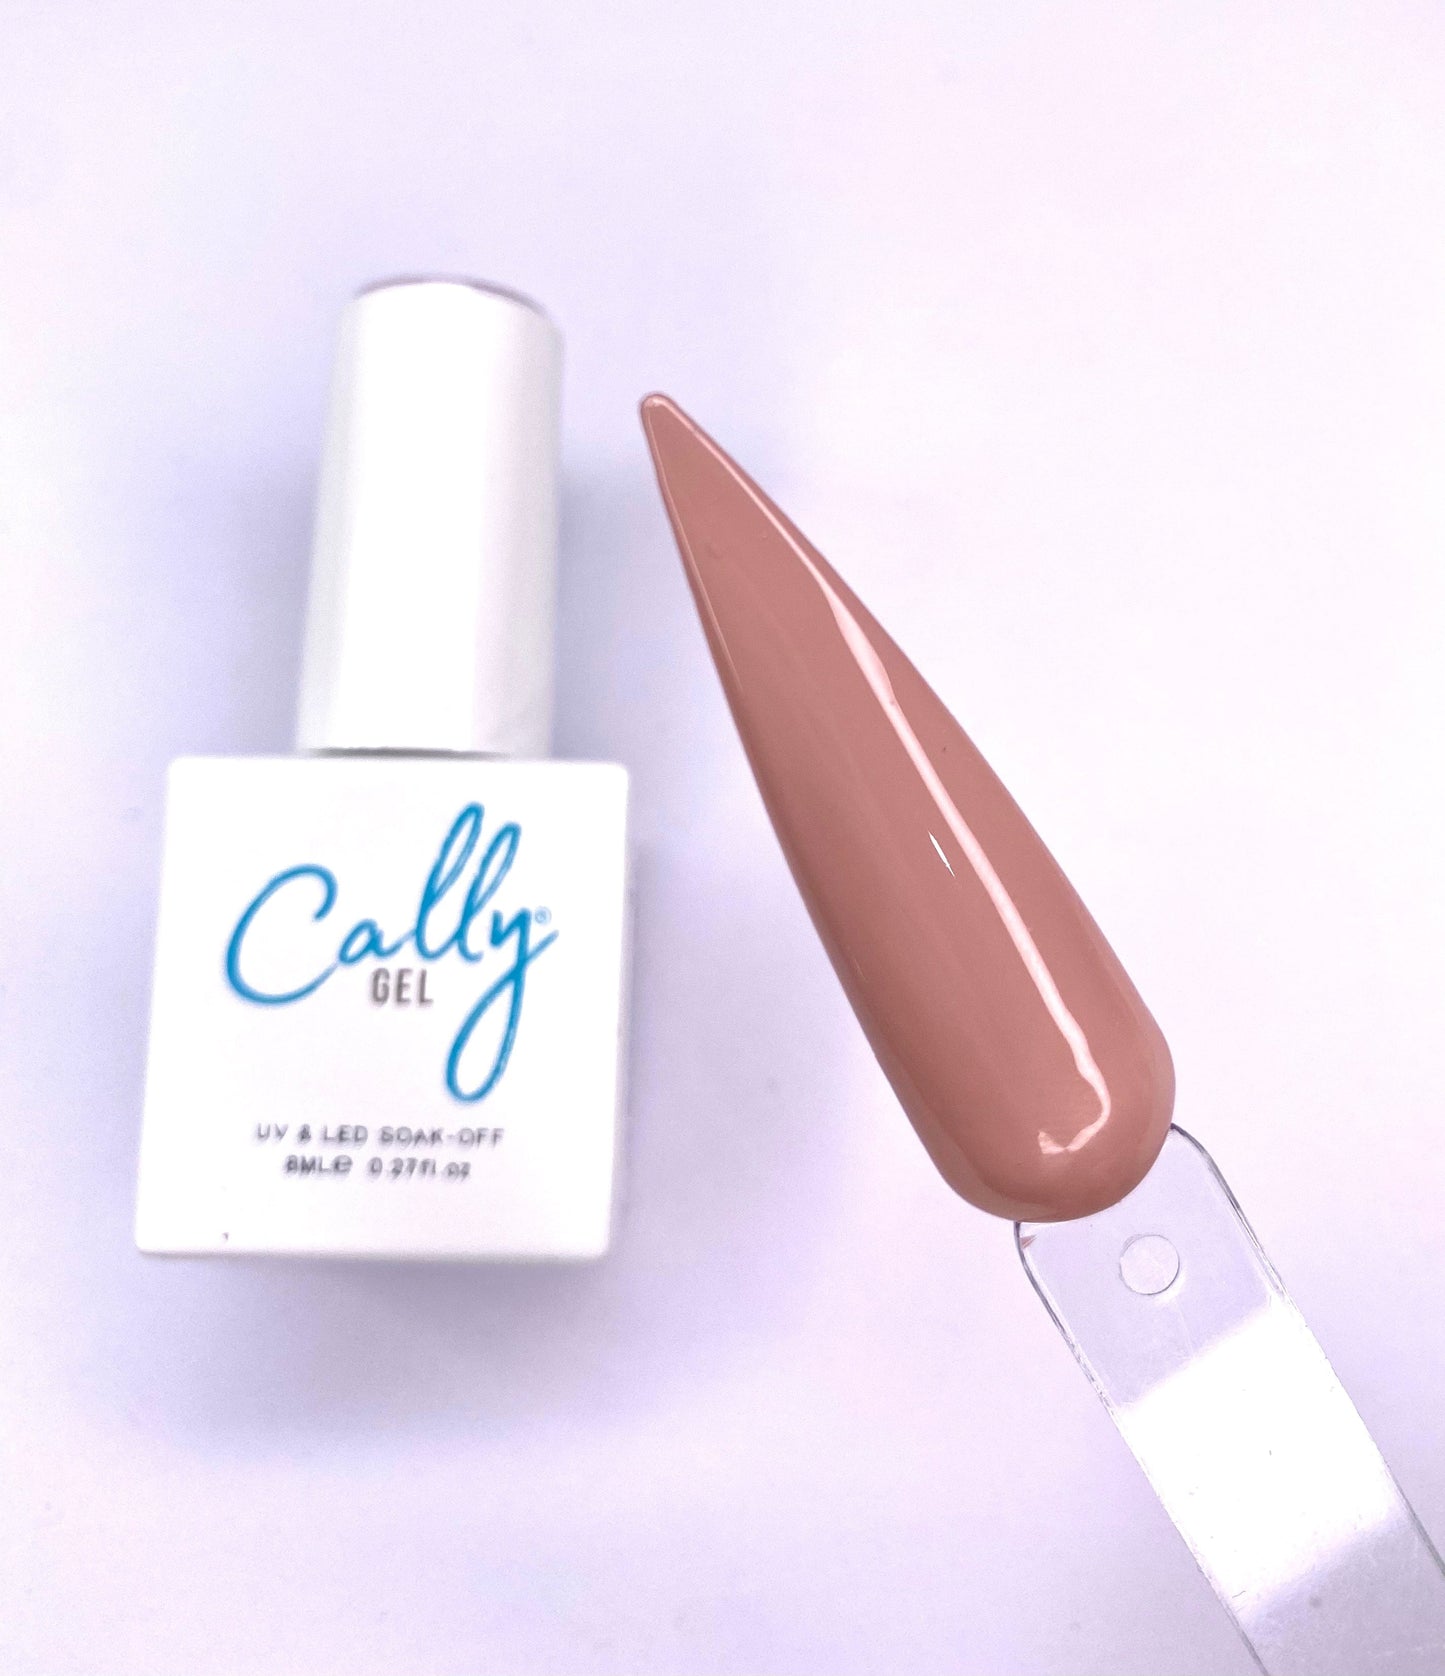 Peony petal cally gel nail polish bottle and with a colour sample